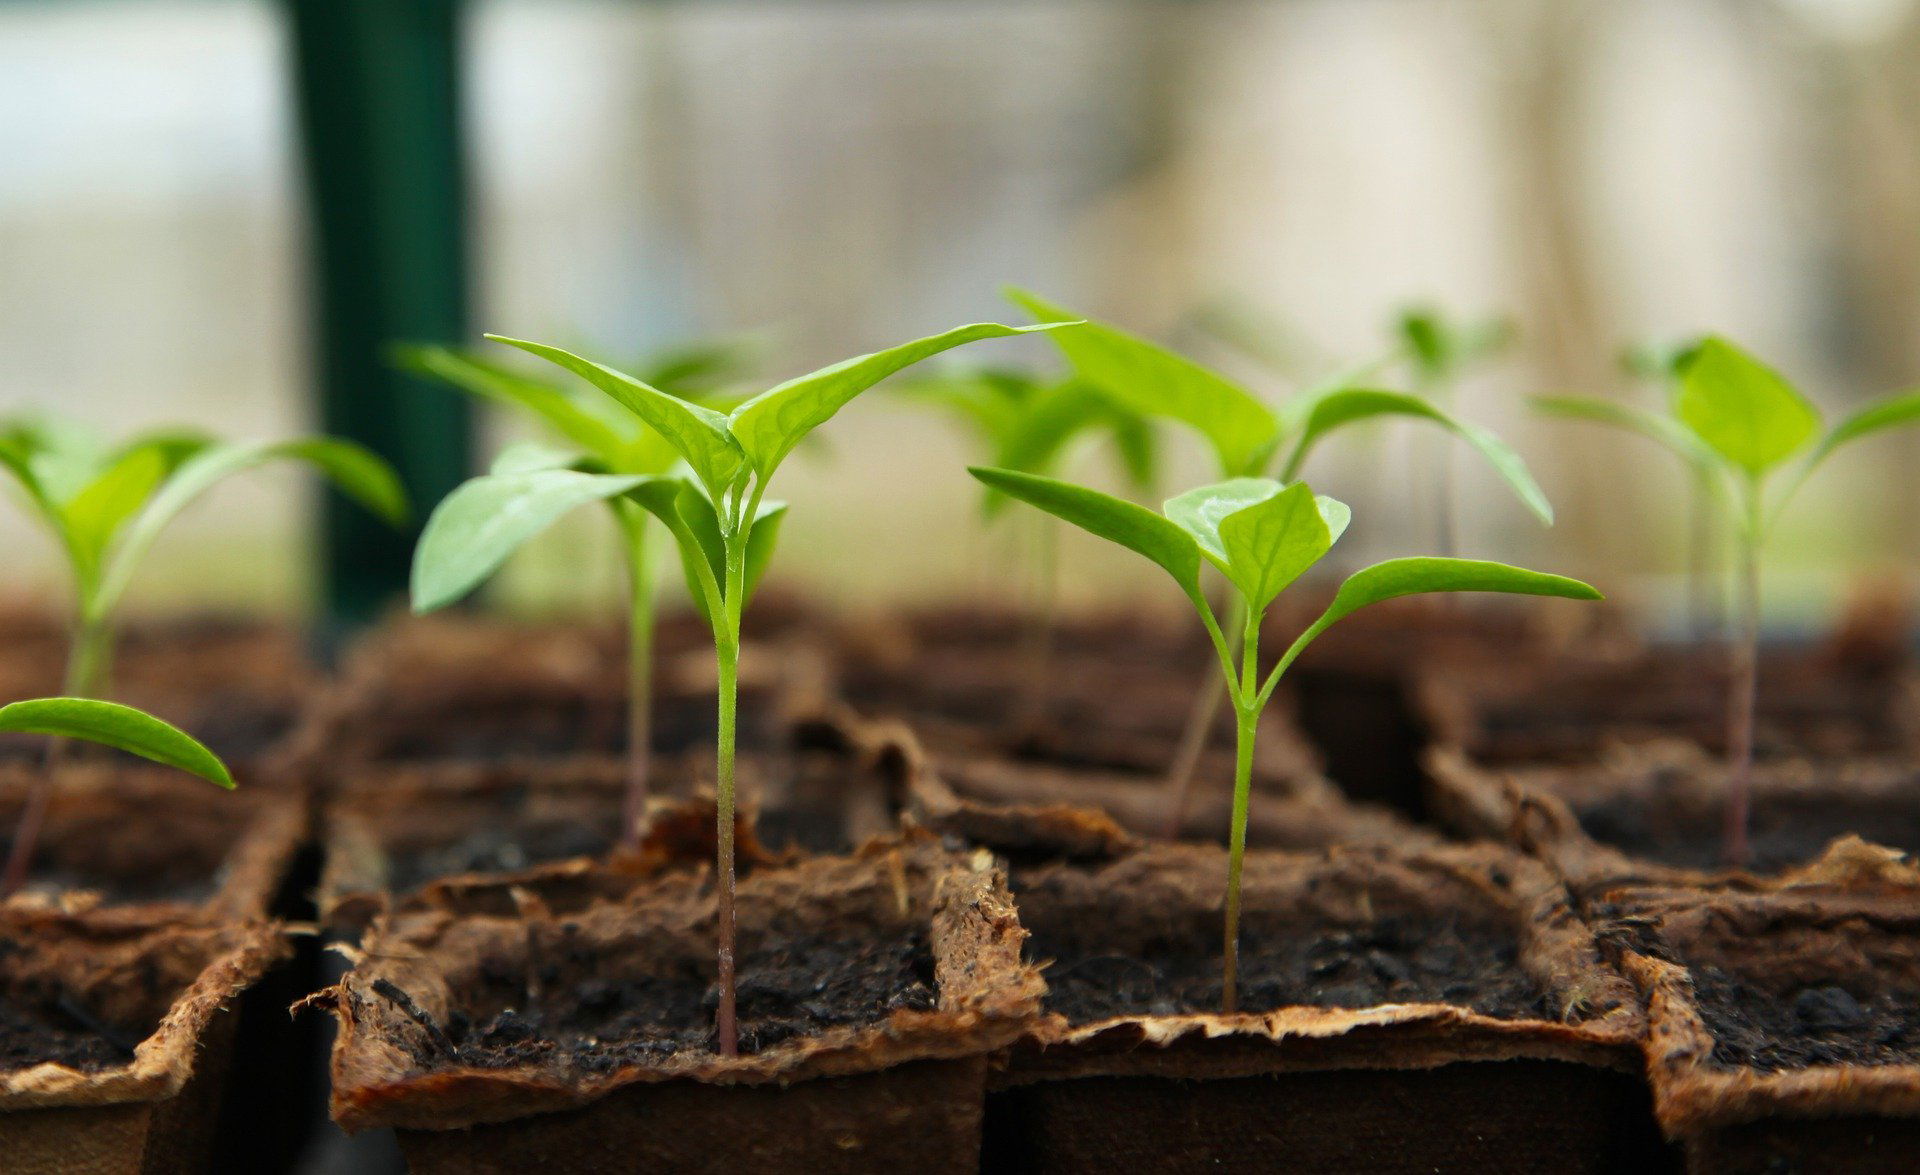 How to start growing your own victory garden.